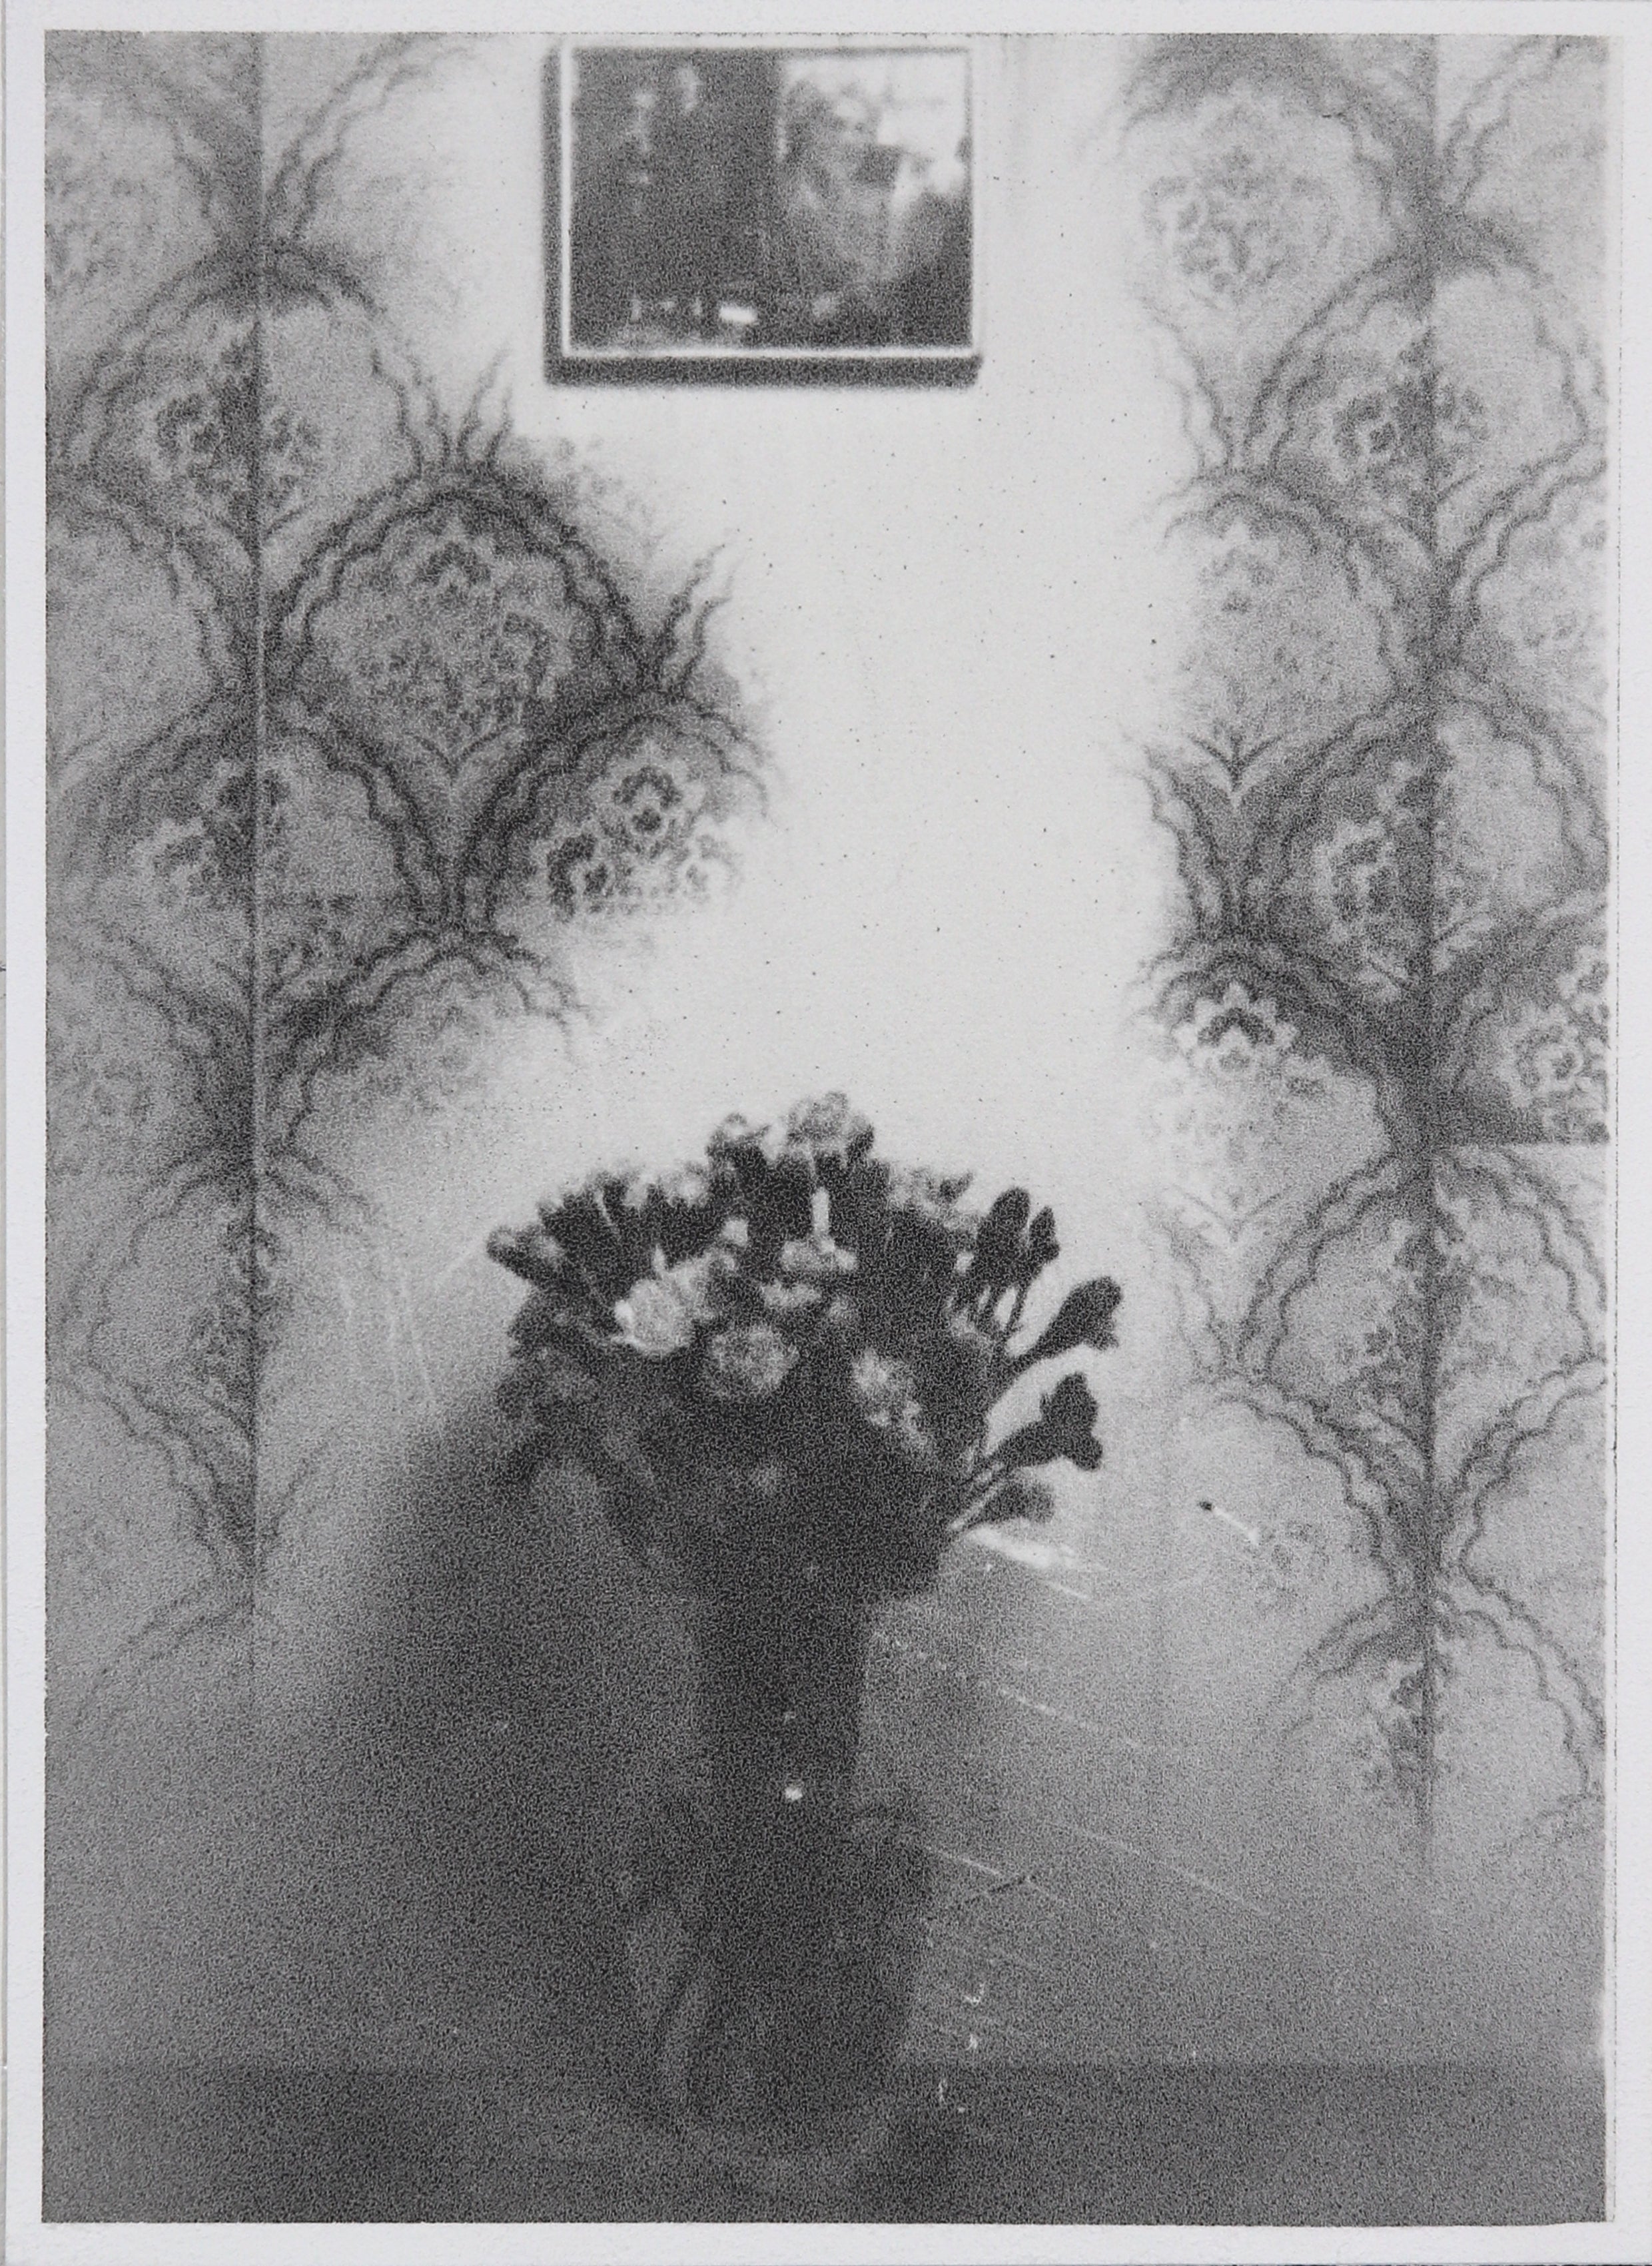 Michael Boffey 'Interior with Wallpaper', 2021 Silver gelatin on watercolour paper 29.7x21cm